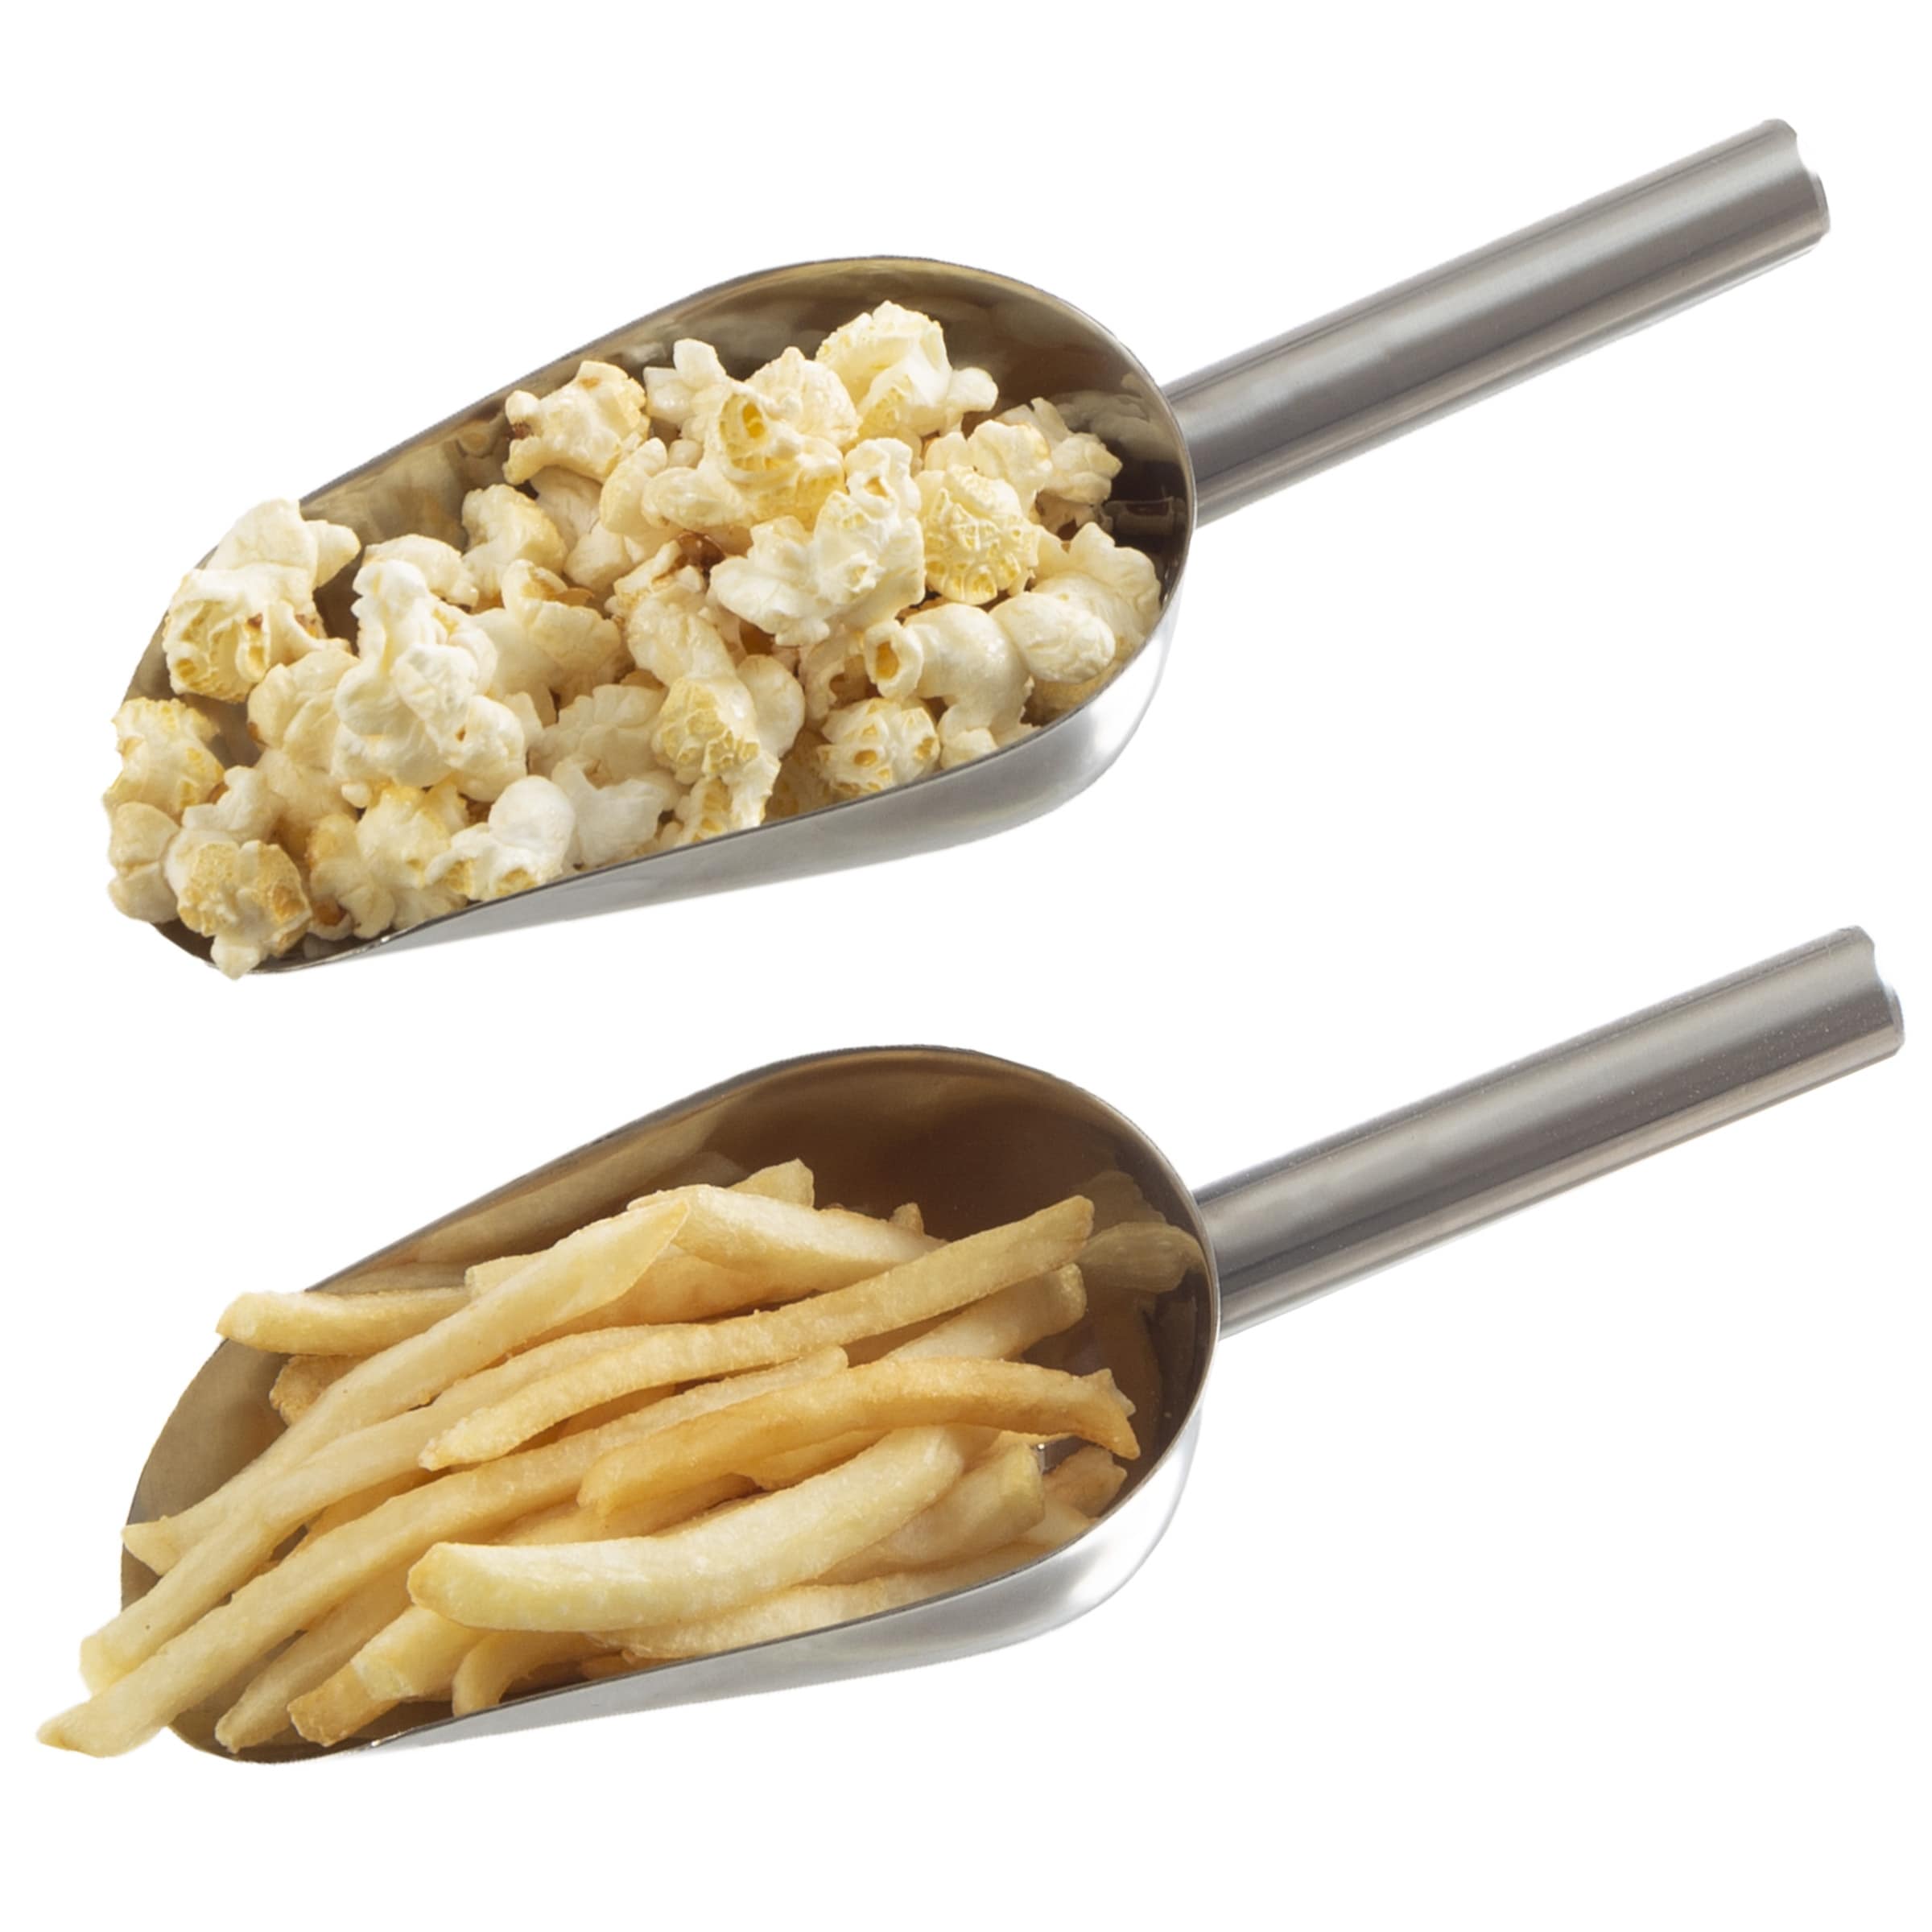 https://ak1.ostkcdn.com/images/products/is/images/direct/ce6a70a781d9103c6bd8de8b37c865a6e2a506f3/Popcorn-Scoop-and-Seasoning-Shaker-Set-%E2%80%93-2-Piece-Serving-Accessories-Kit-by-Great-Northern-Popcorn-%28Single-Scoop%29.jpg